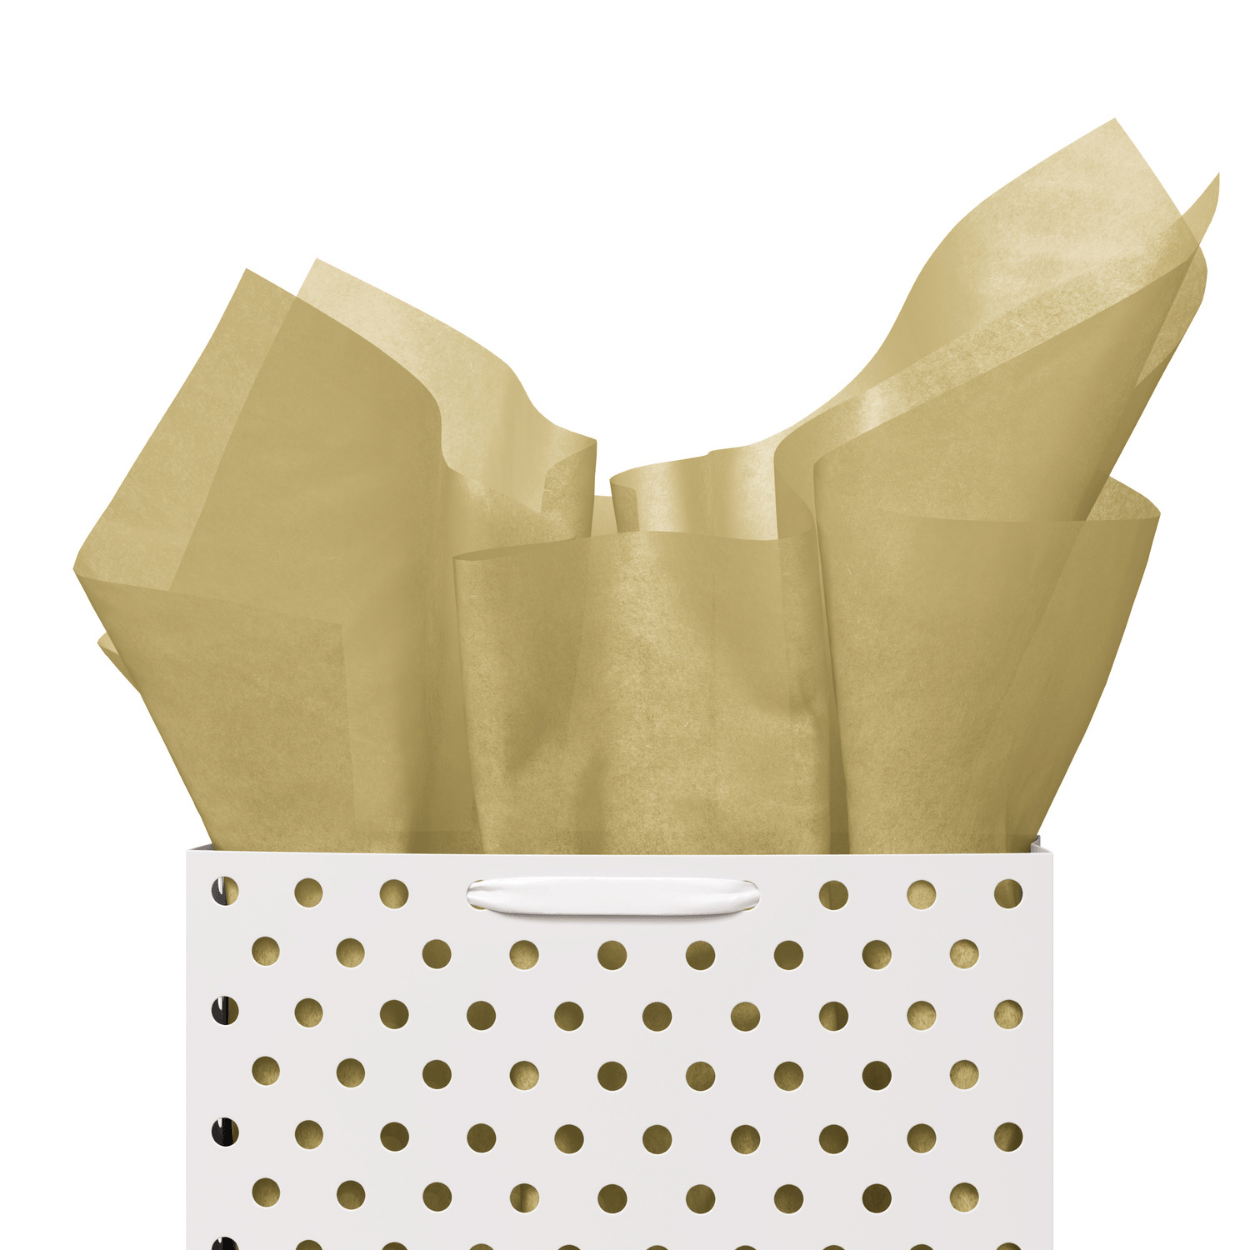 Gold Gift Bags with Tissue Paper (5.45 x 7.8 x 2.45 in, 20 Pack